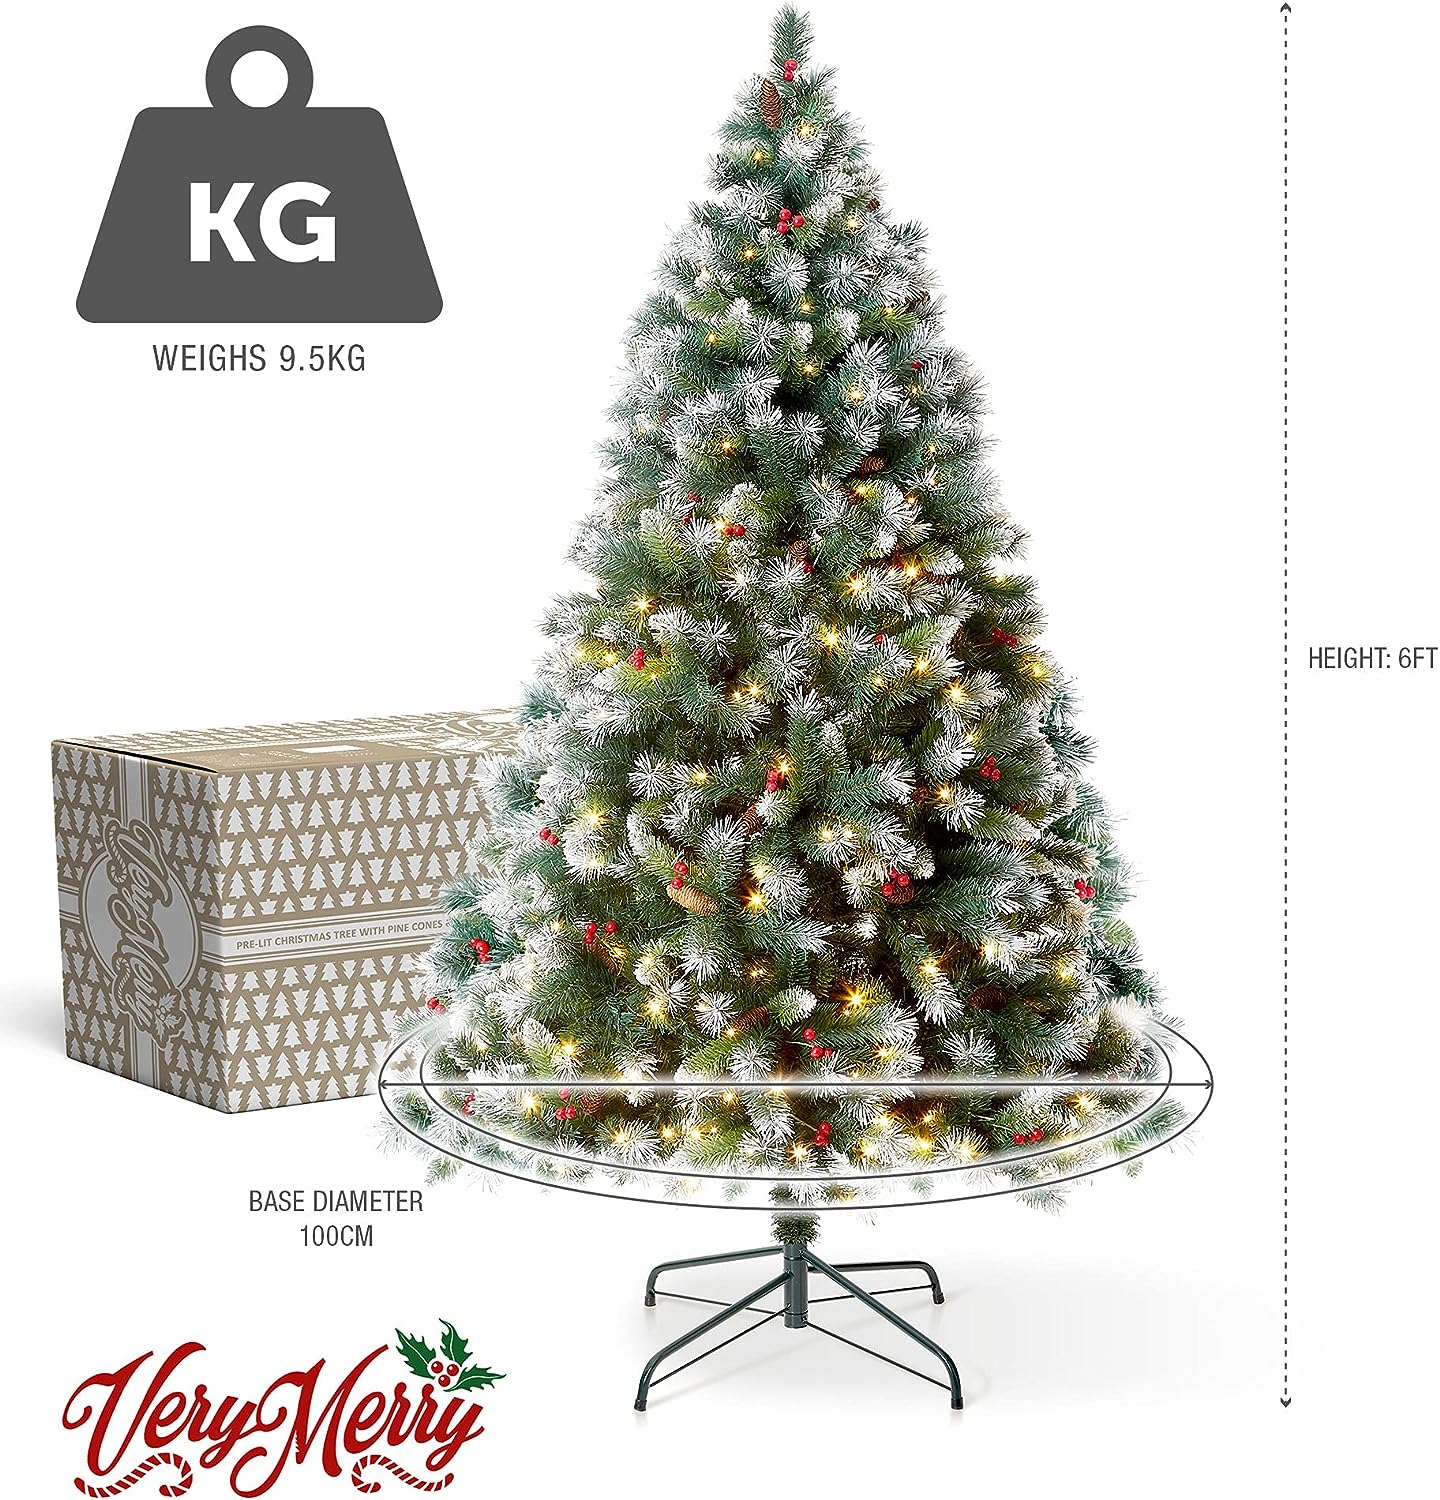 VeryMerry 6FT 'Claudia' Pre-Lit Christmas Tree with 300 Built-In Warm White LED Lights with Auto-Off Timer, 8 Lighting Modes, Decorative Pinecones and Berries